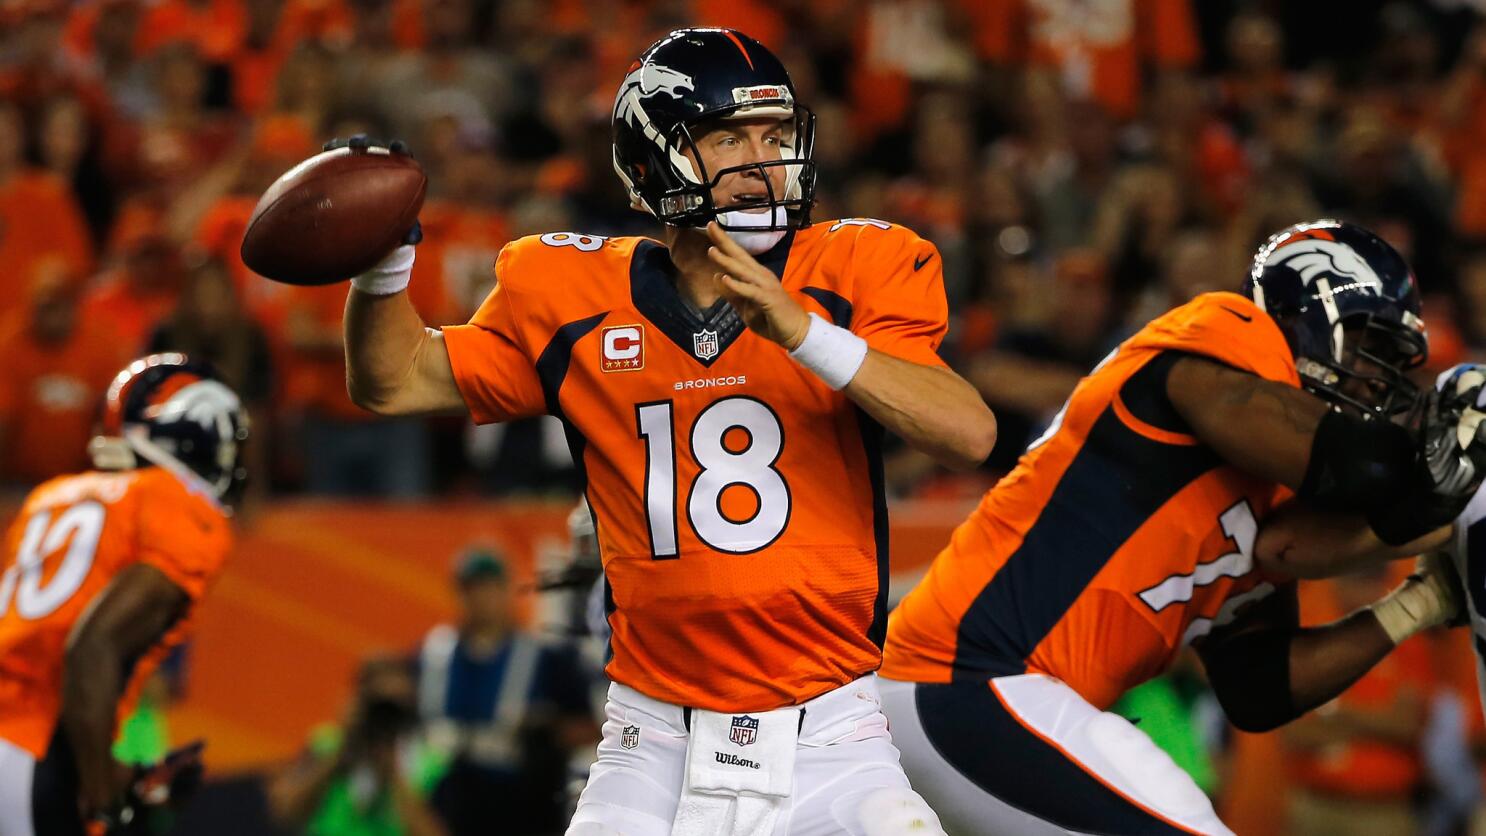 Peyton Manning, Broncos fend off Colts in 31-24 victory - Los